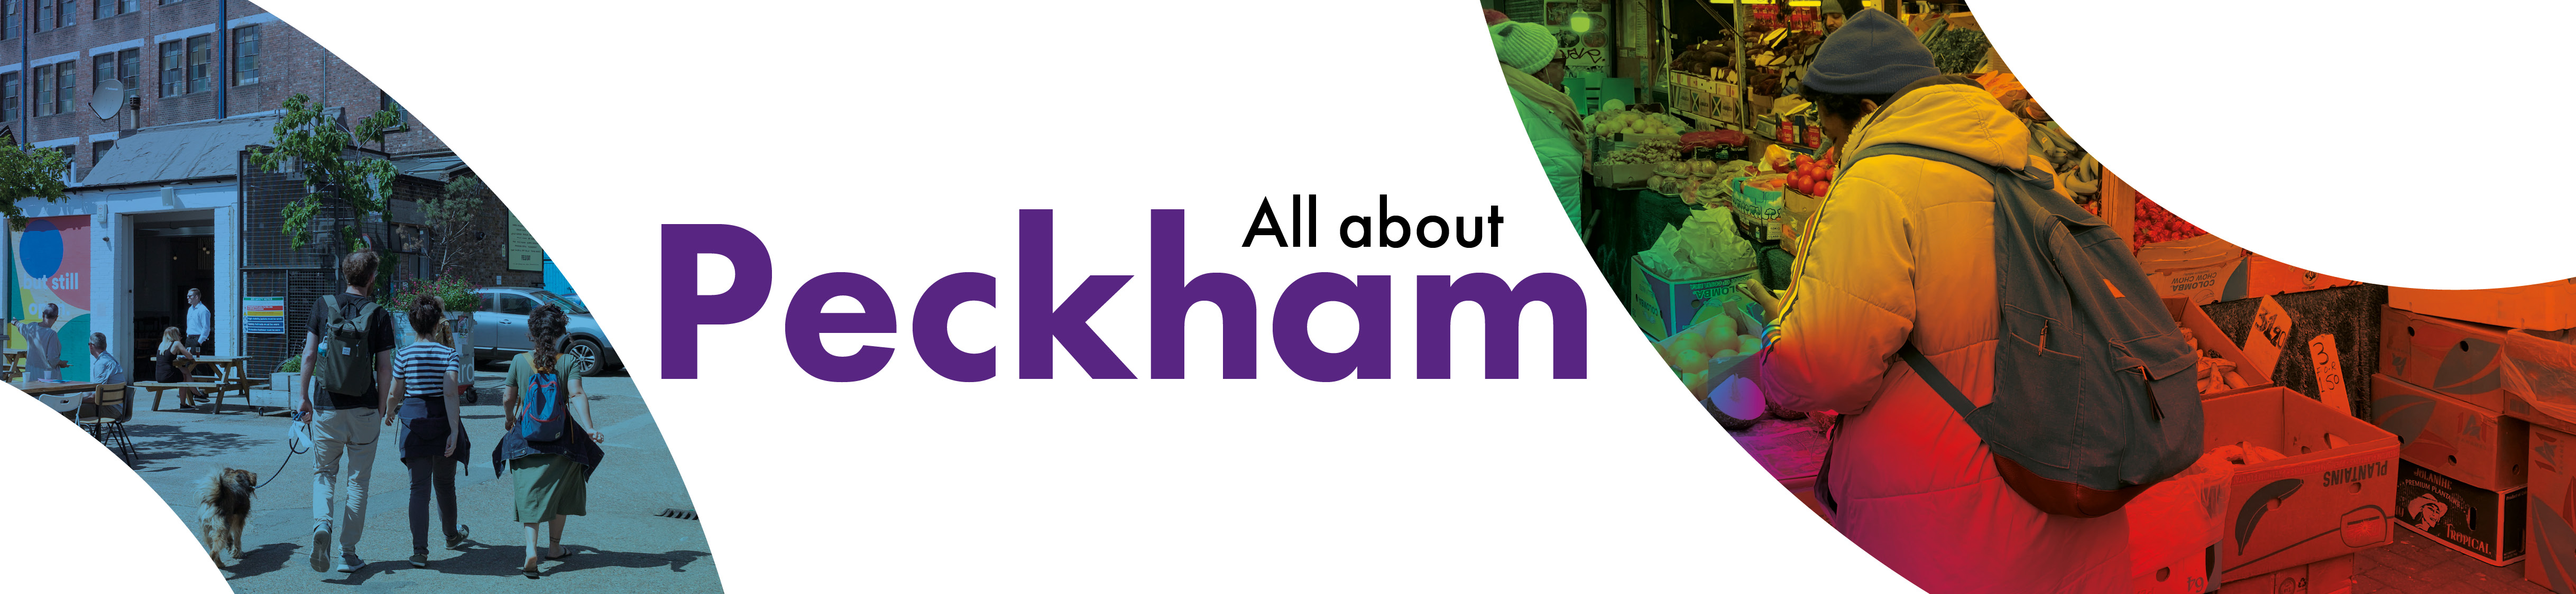 All about Peckham